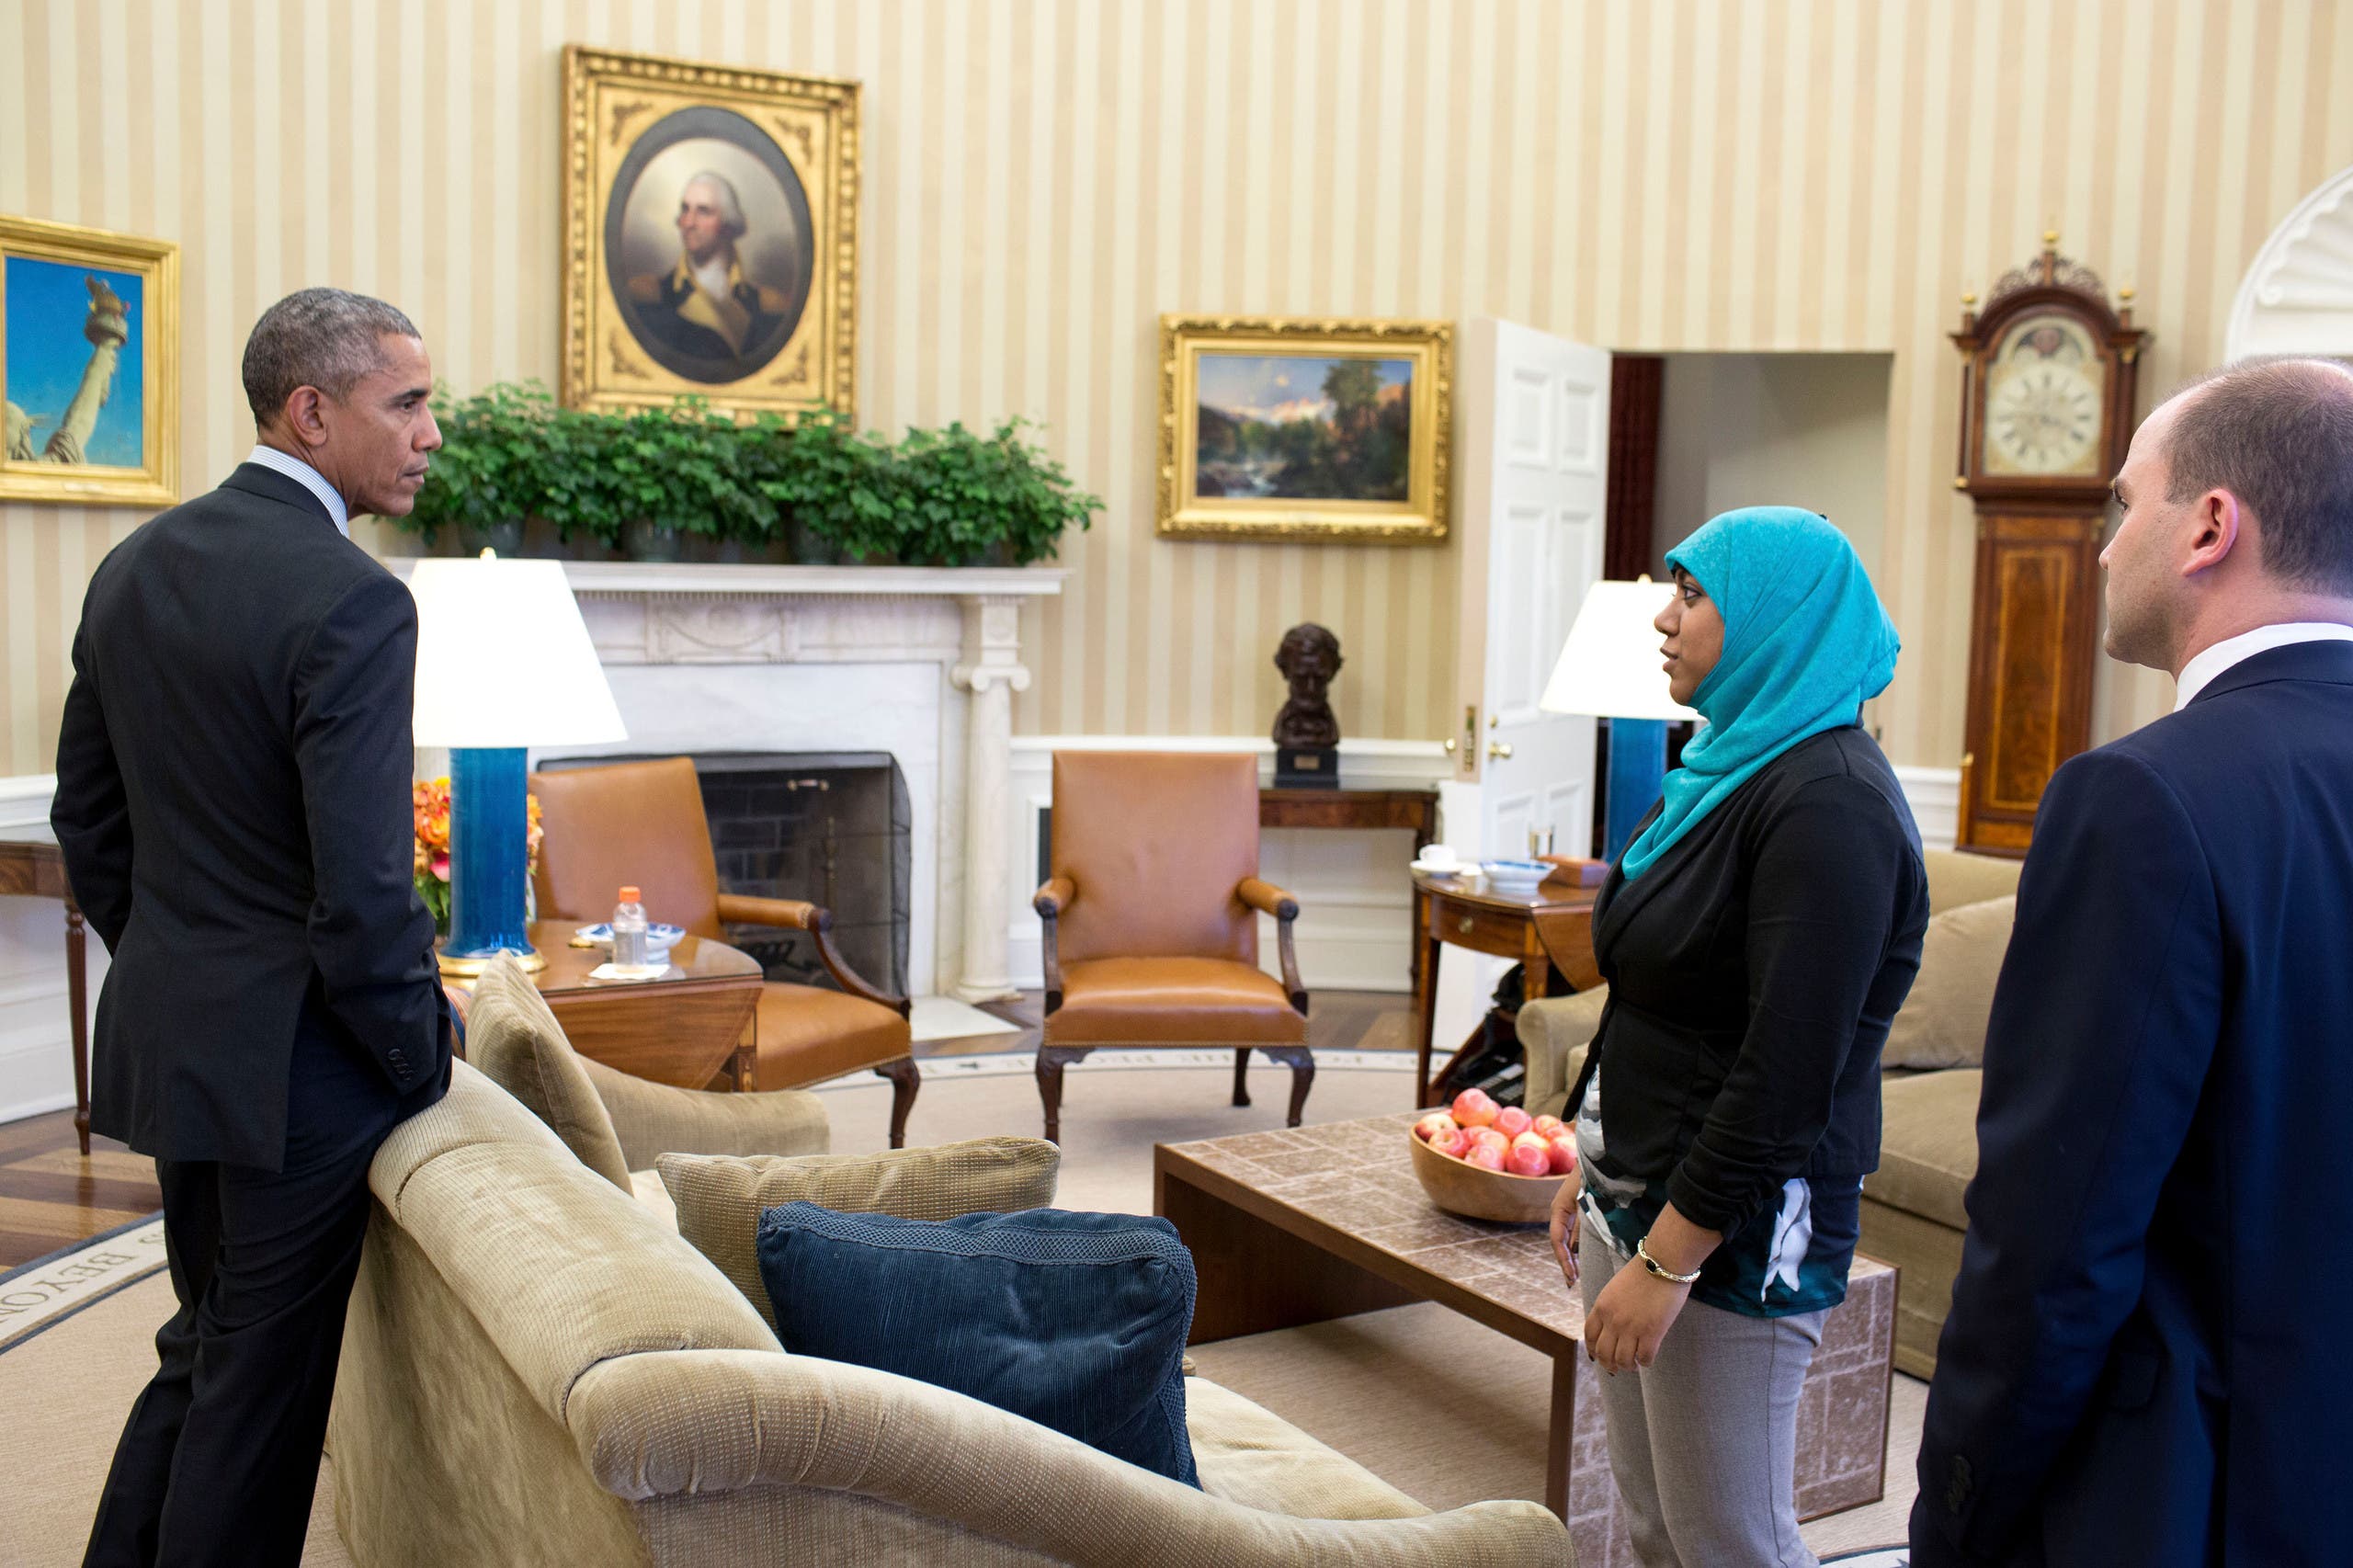 President Barack Obama holds a meeting prep in the Oval Office, Feb. 4, 2015. Participants are: Ben Rhodes, Deputy National Security Advisor, and Rumana Ahmed (Official White House photo by Pete Souza)